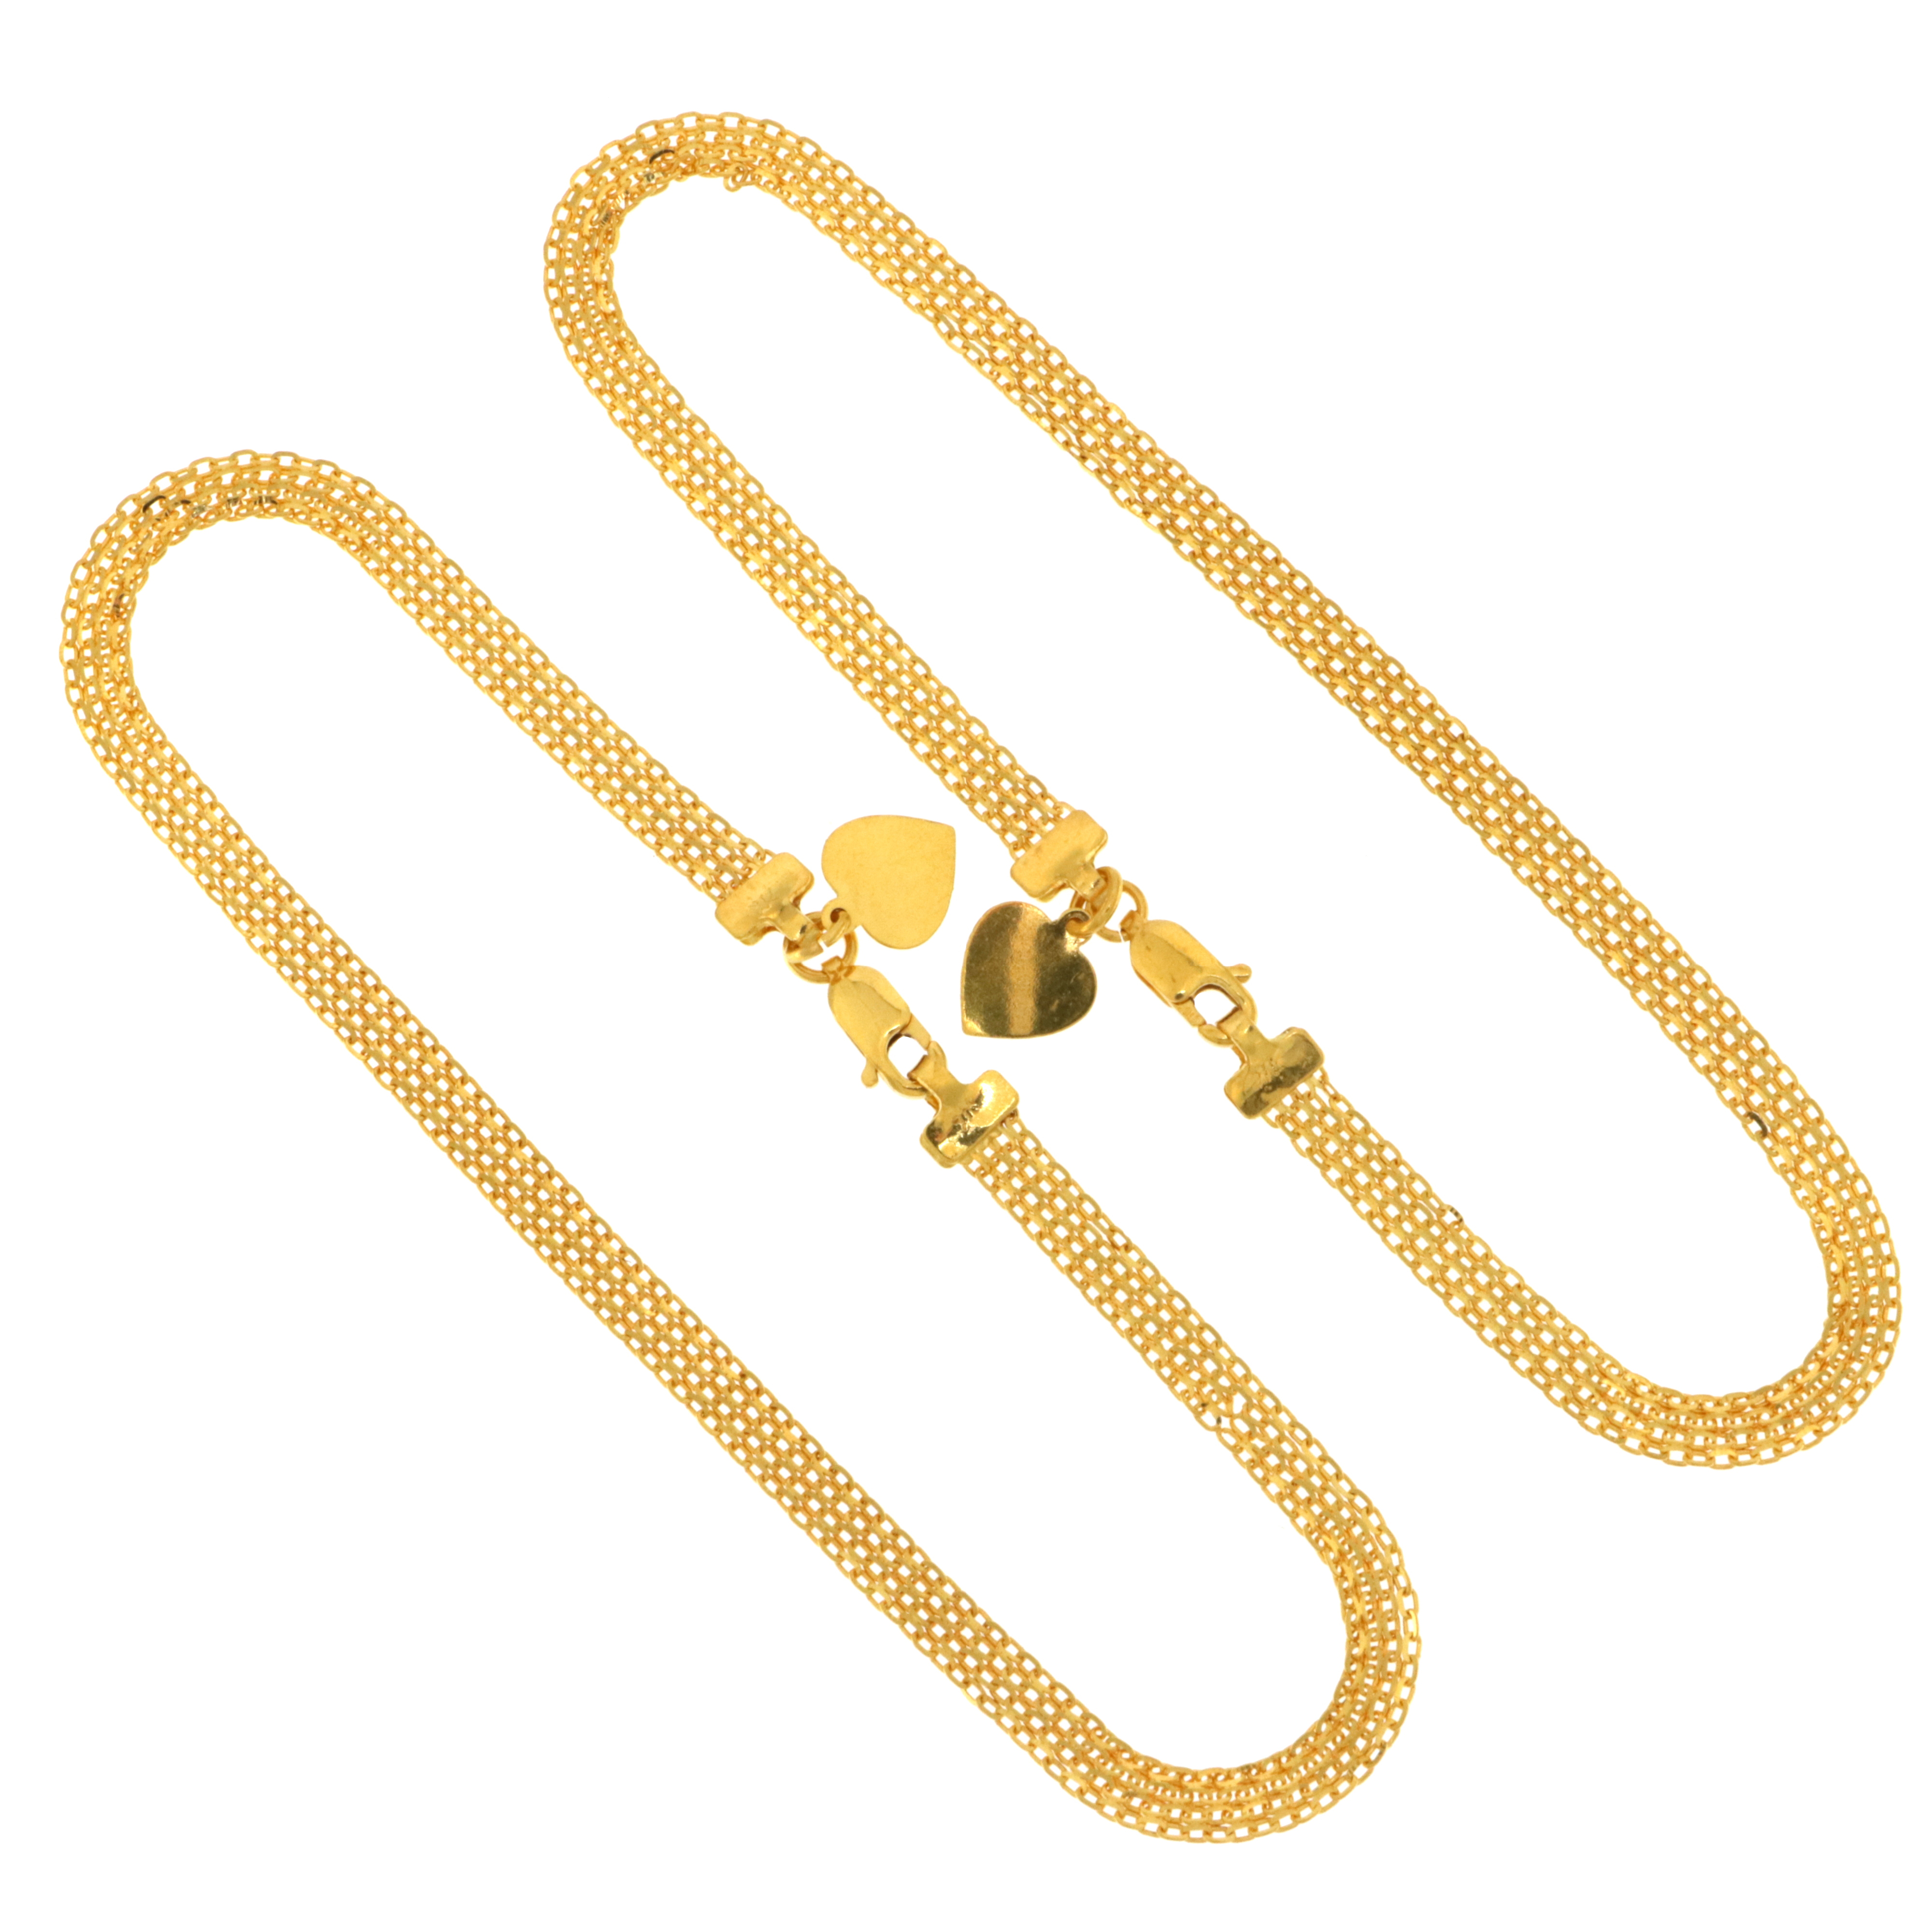 22ct Gold Heart Charm Anklets (Pair)